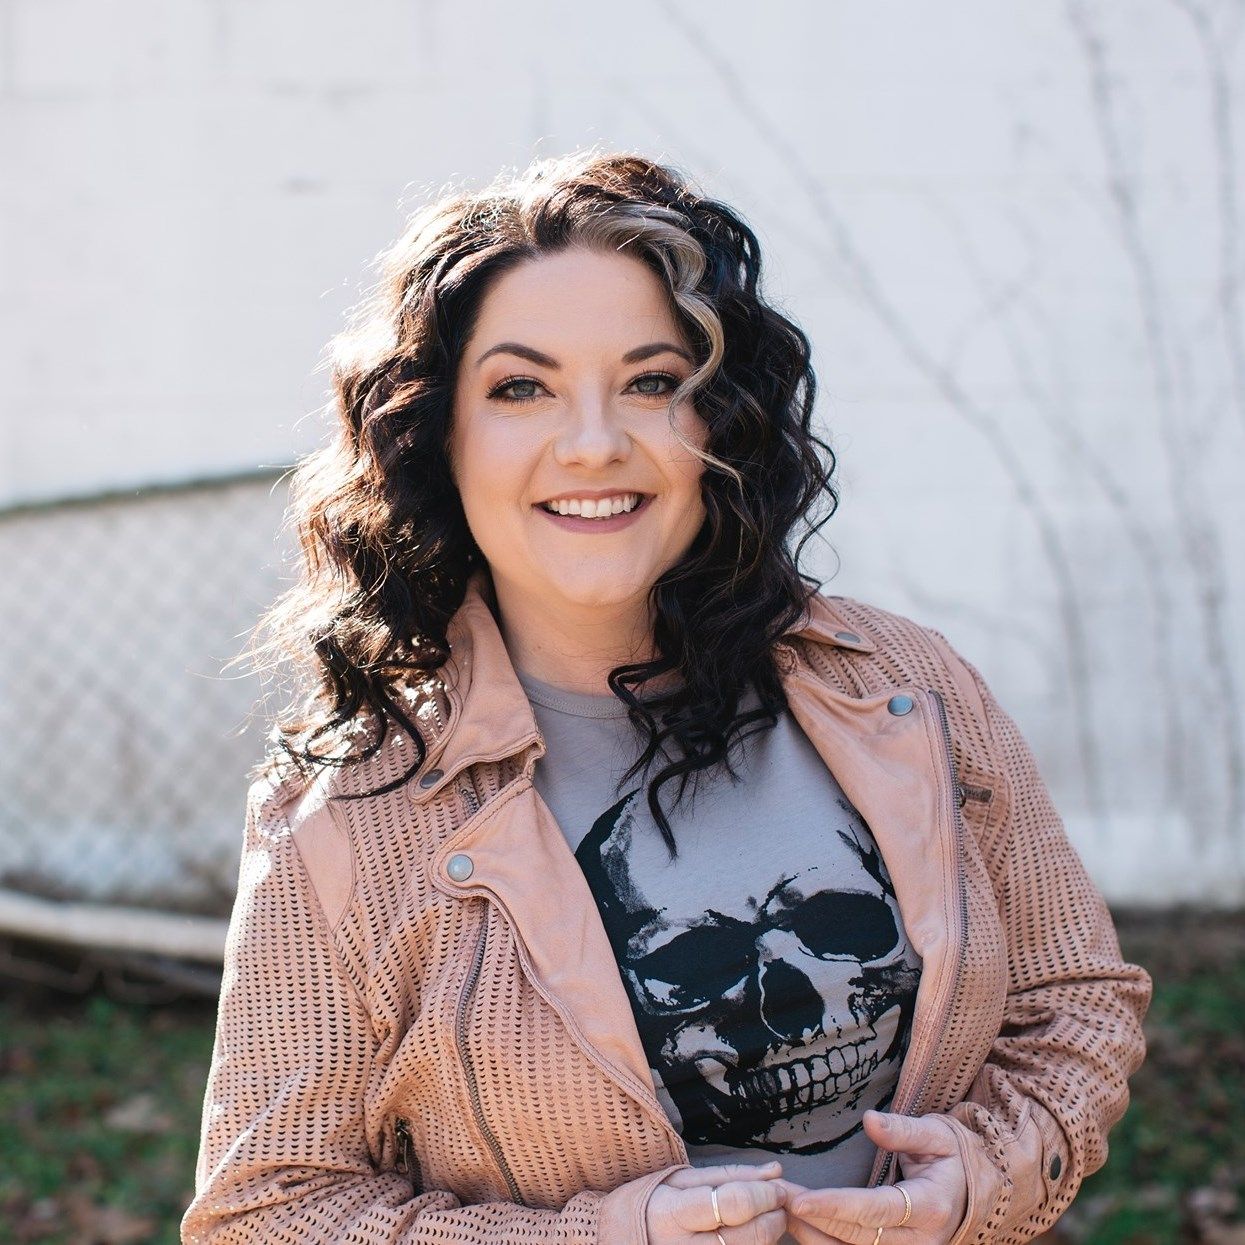 Ashley McBryde Songs A List of 15 of the Best Holler